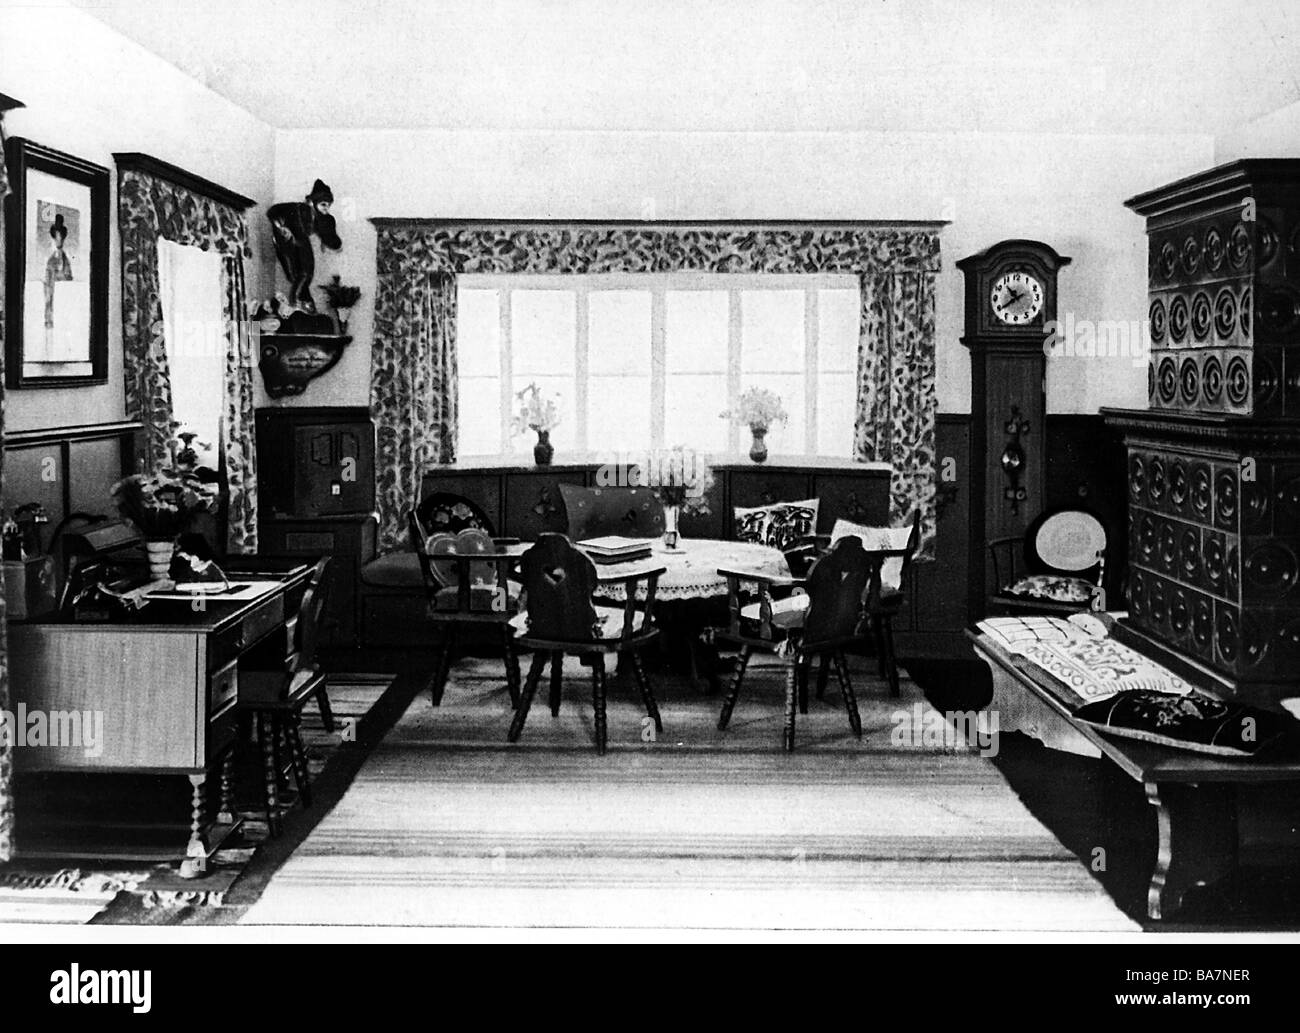 Hitler, Adolf, 20.4.1889 - 30.4.1945, German politician (NSDAP) Chancellor since 30.1.1933, his house Berghof at Obersalzberg, interior view, room with tiled stove, Stock Photo